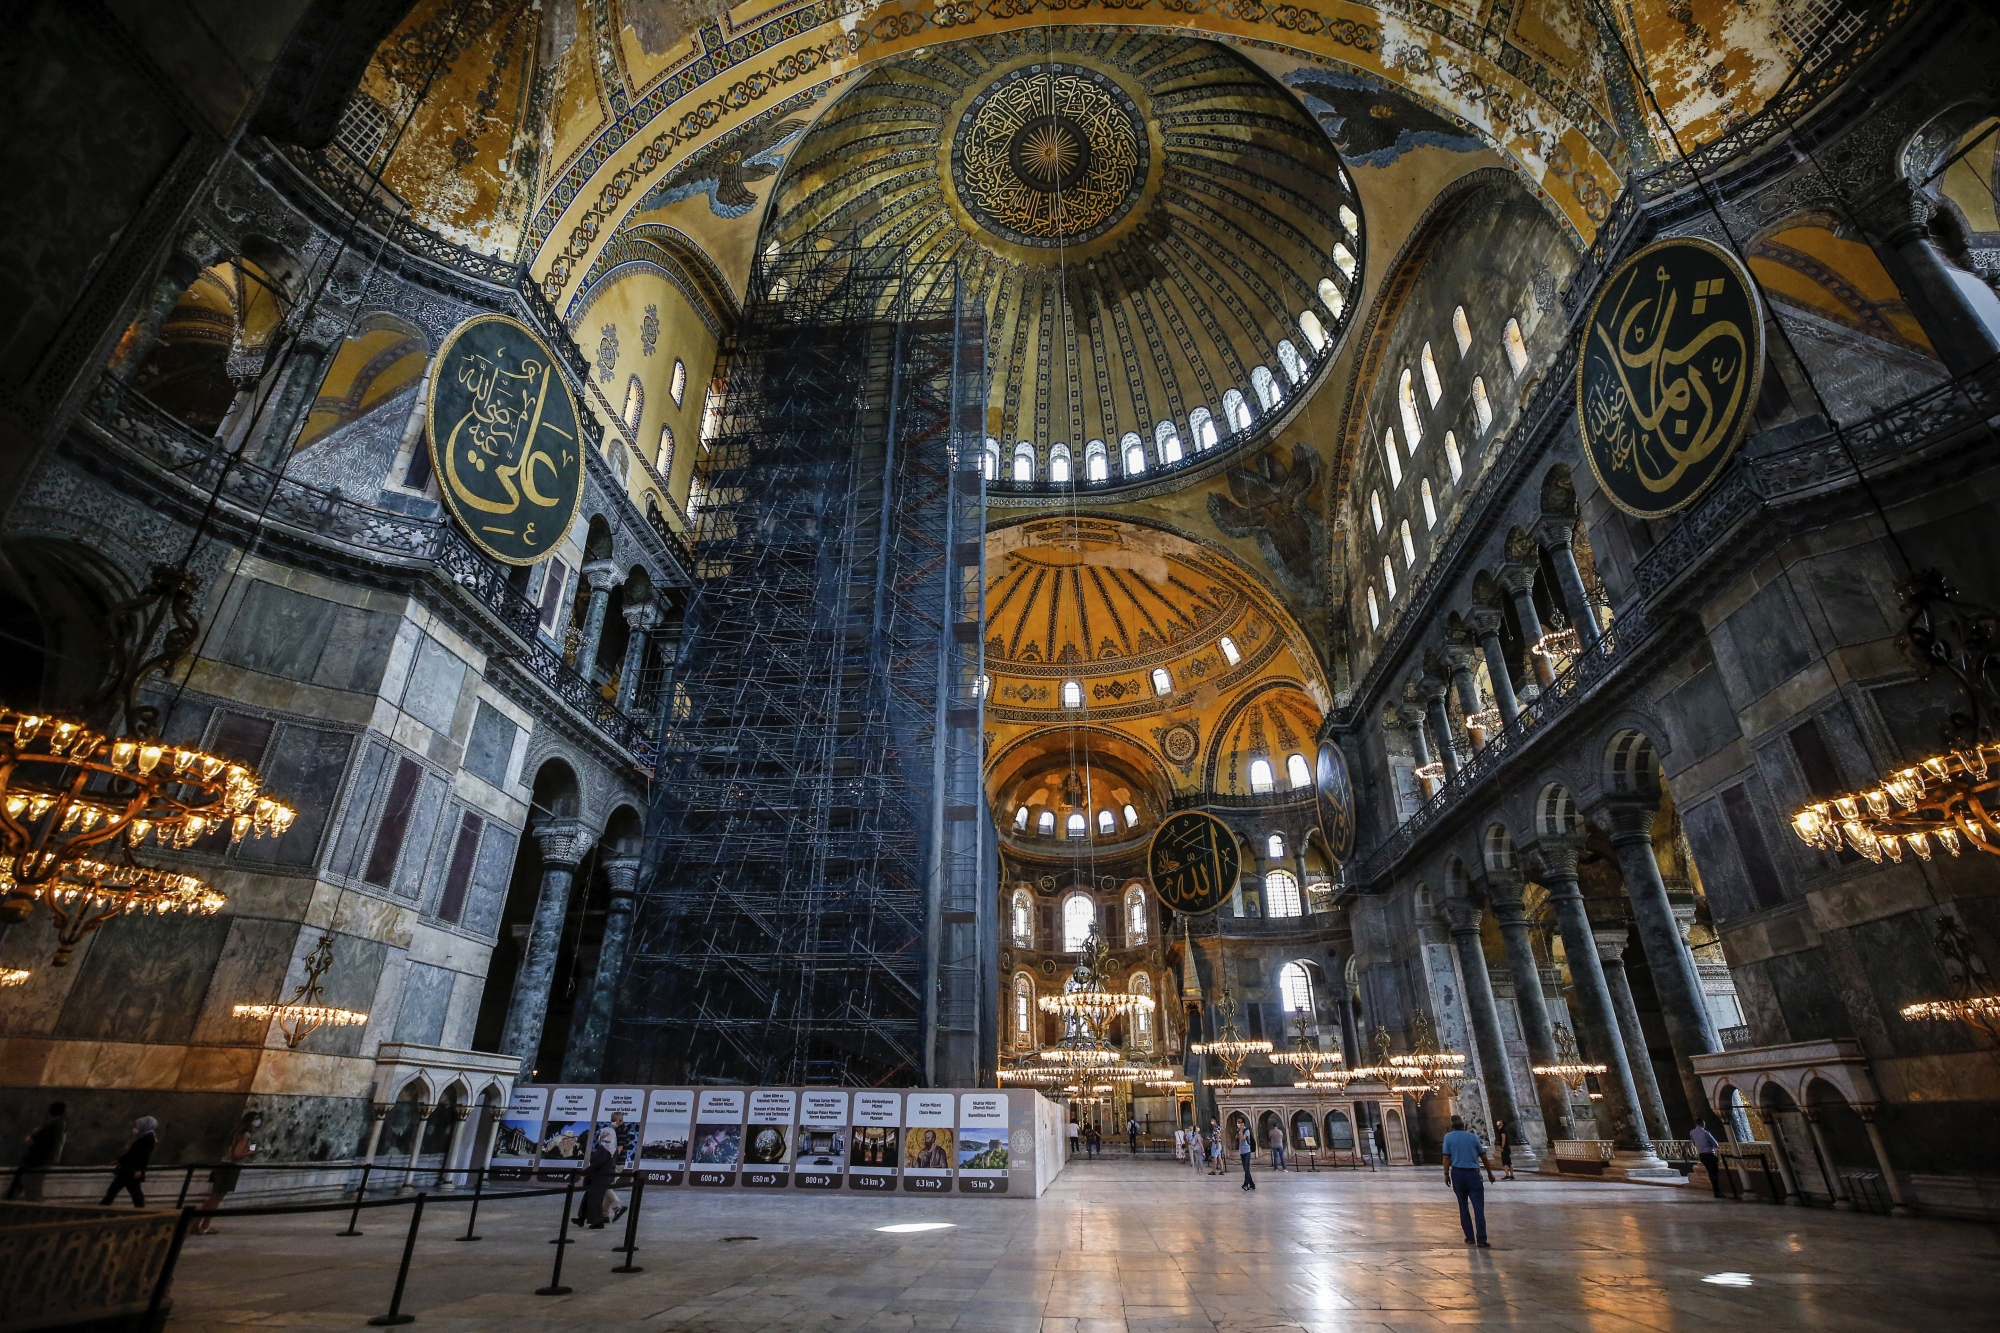 People visit the Byzantine-era Hagia Sophia, one of Istanbul's main tourist attractions in the historic Sultanahmet district of Istanbul on Thursday, June 25, 2020. The 6th-century building is now at the center of a heated debate between conservative groups who want it to be reconverted into a mosque and those who believe the World Heritage site should remain a museum. (AP Photo/Emrah Gurel)
ArcInfo